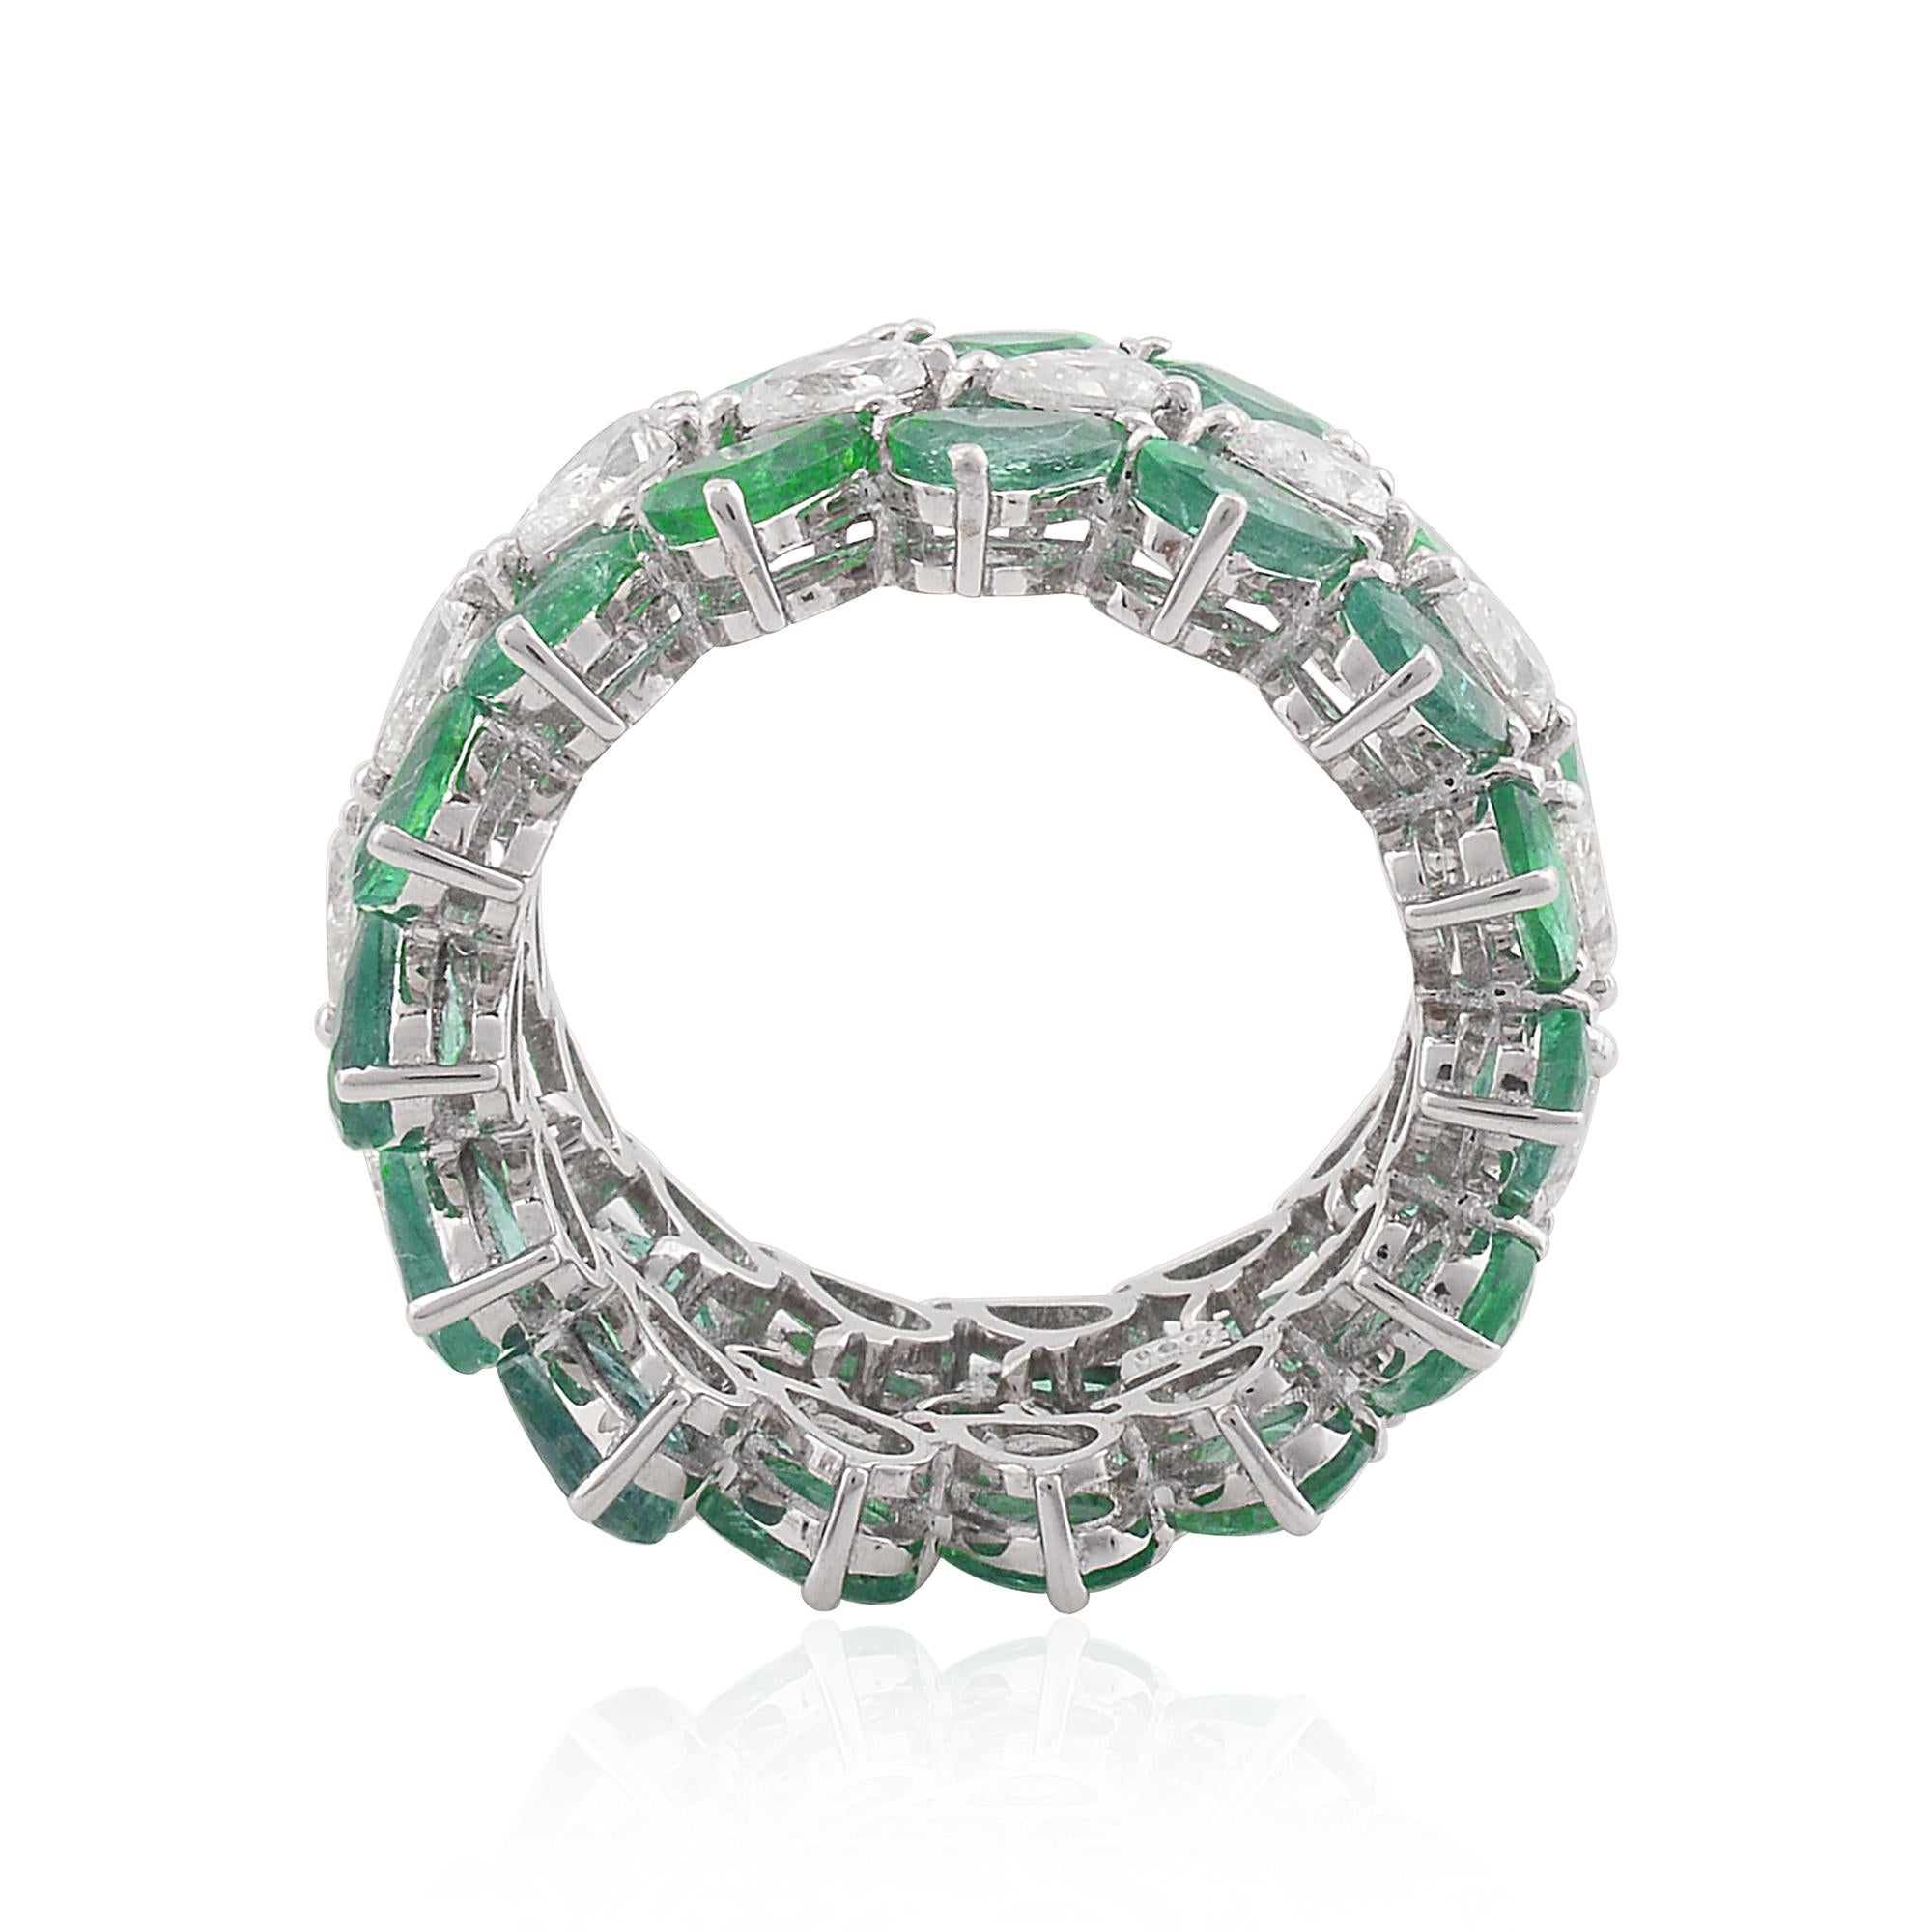 Item Code :- SER-2572
Gross Wt :- 7.71 gm
18k Solid White Gold Wt :- 6.33 gm
Natural Diamond Wt :- 2.10 ct  ( AVERAGE DIAMOND CLARITY SI1-SI2 & COLOR H-I )
Emerald Wt :- 4.80 ct
Ring Size :- 7 US & All size available

✦